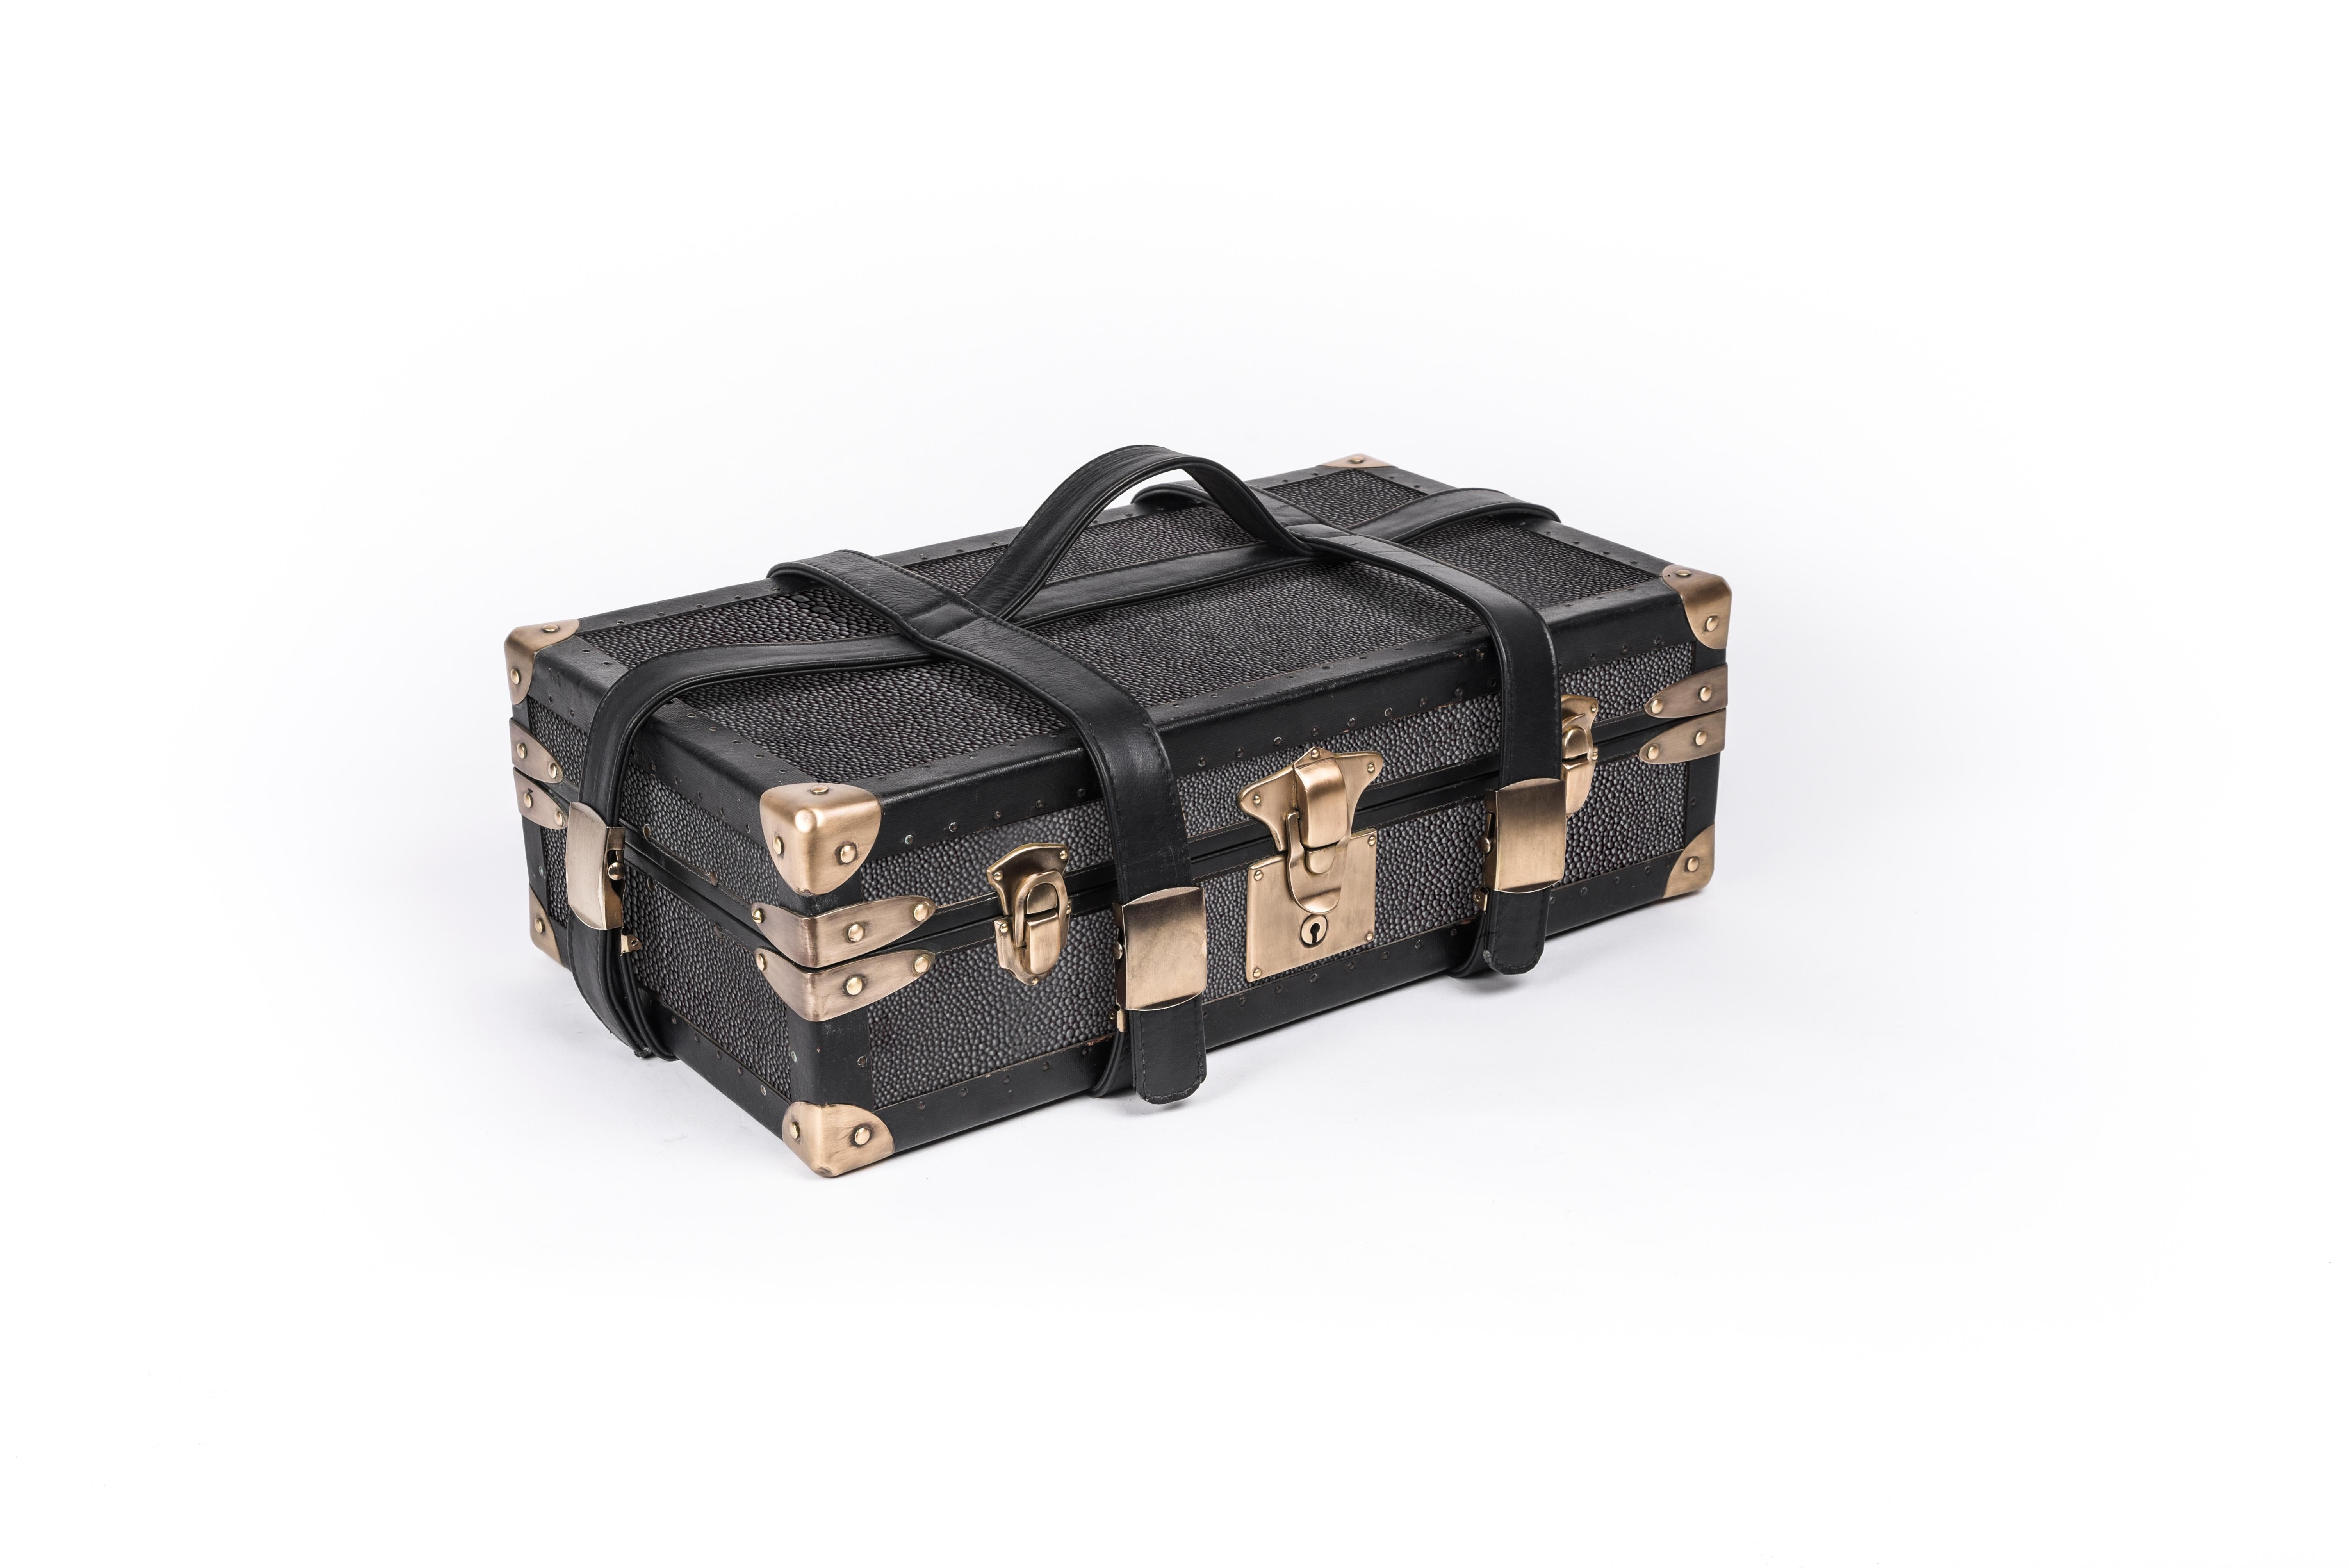 As an ode to vintage steamer trunks, R&Y Augousti revisits this old-world piece in a modern context by recreating their own version inlaid in their signature material shagreen. This steamer inspired-trunk is perfect for traveling or using as a